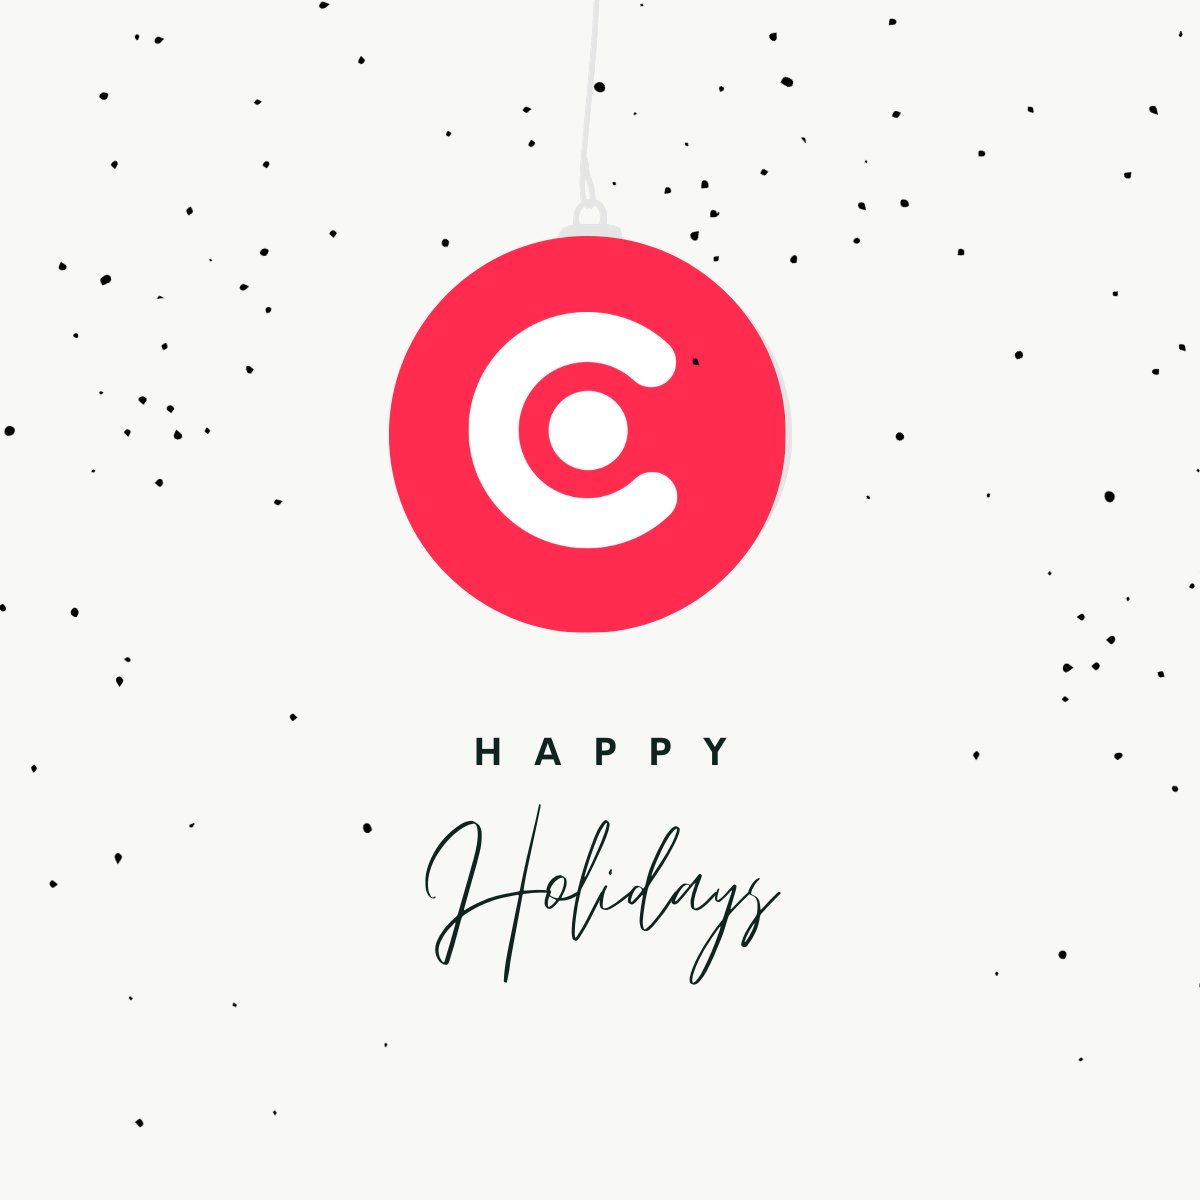 As 2023 comes to a close, how was your year? For us at Calculum, it was filled with growth and milestones that wouldn’t have been possible without your continuous support. Thank you, and here’s wishing everyone a joyful holiday season. #SeasonGreetings #WorkingCapital #AI